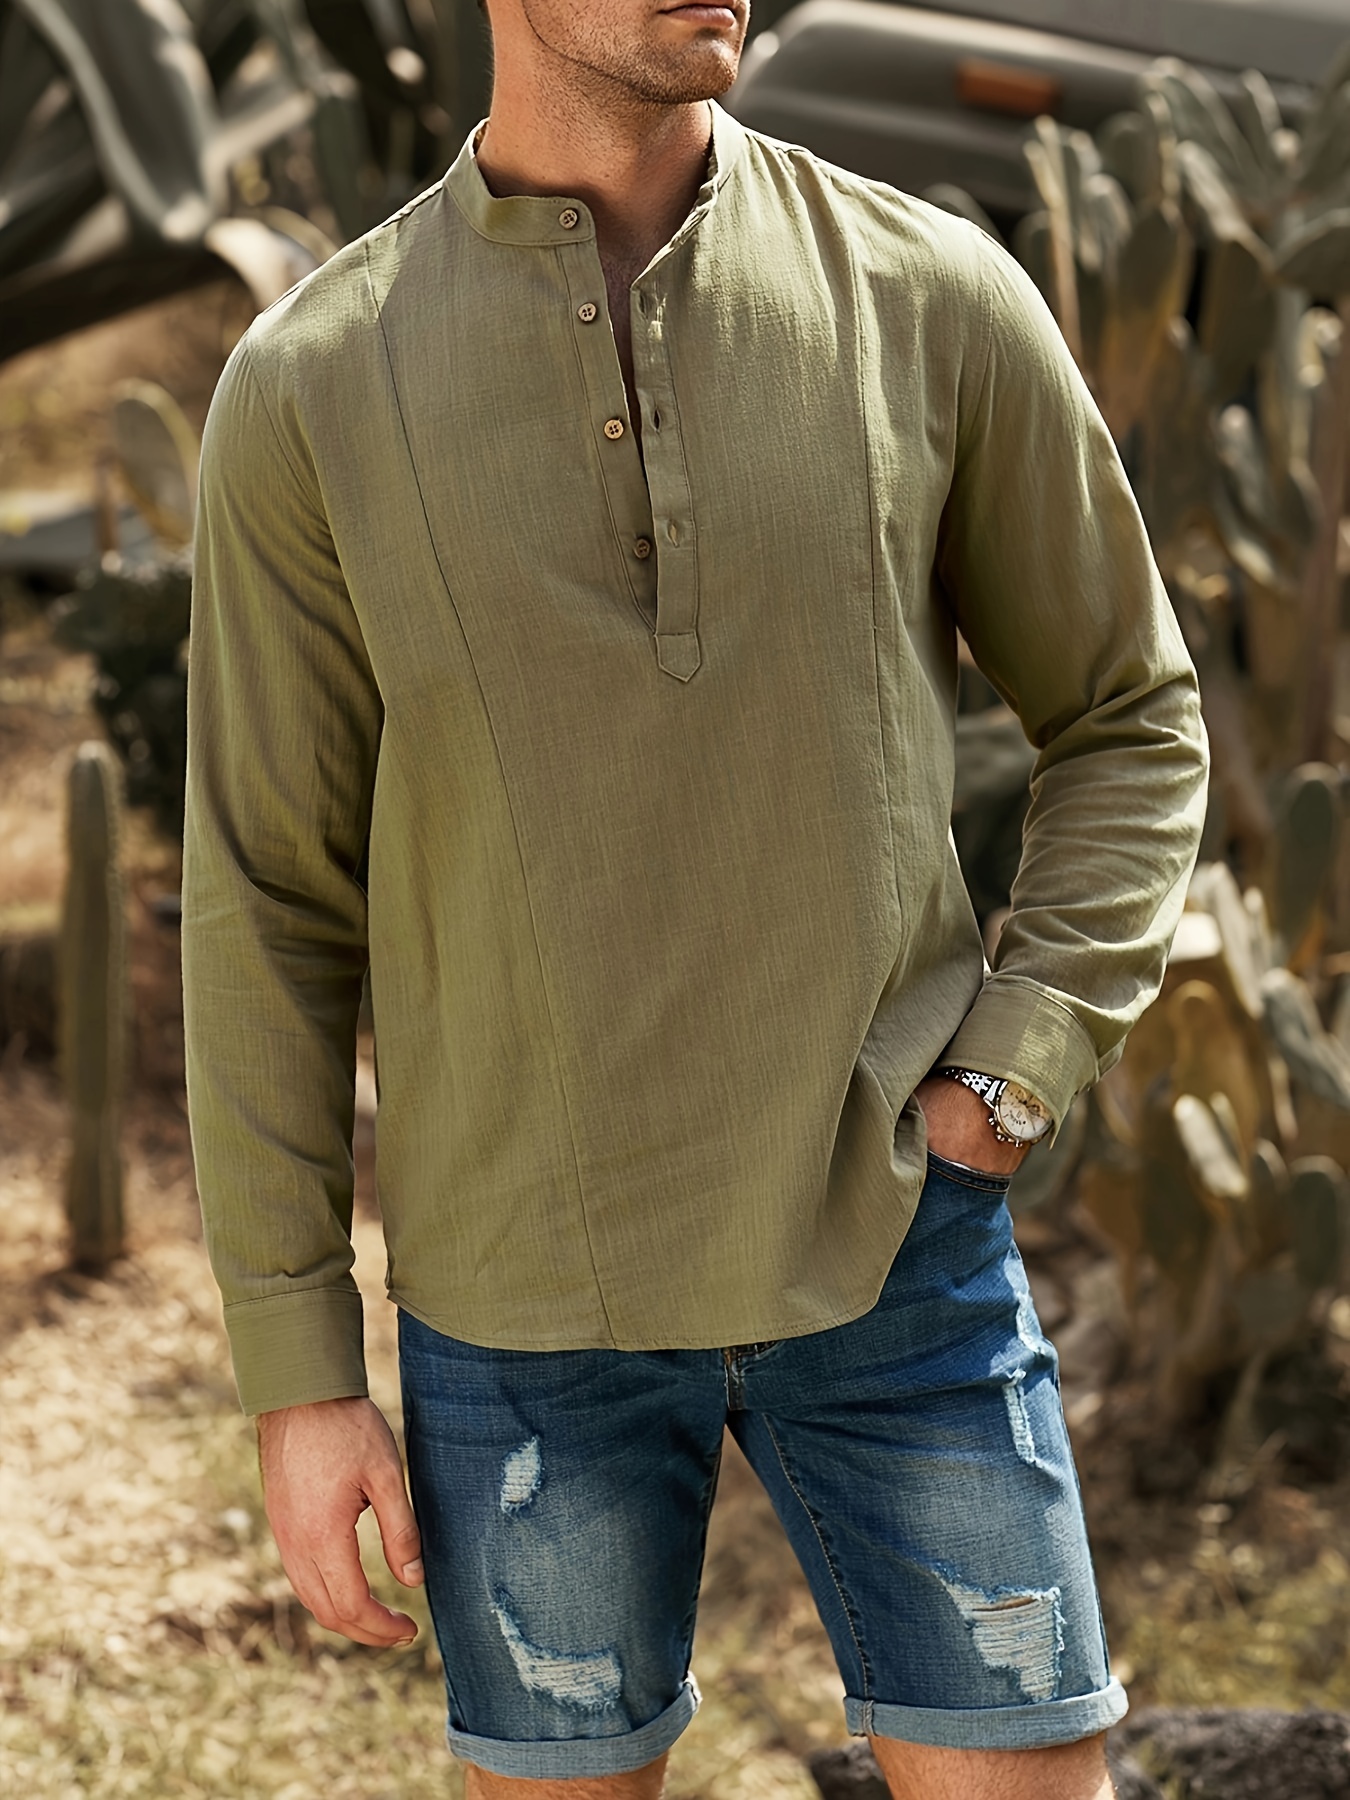 Classic Solid Color Men's Basic Cotton Tee, Casual Slim Short Sleeve Henley  Shirt With Button